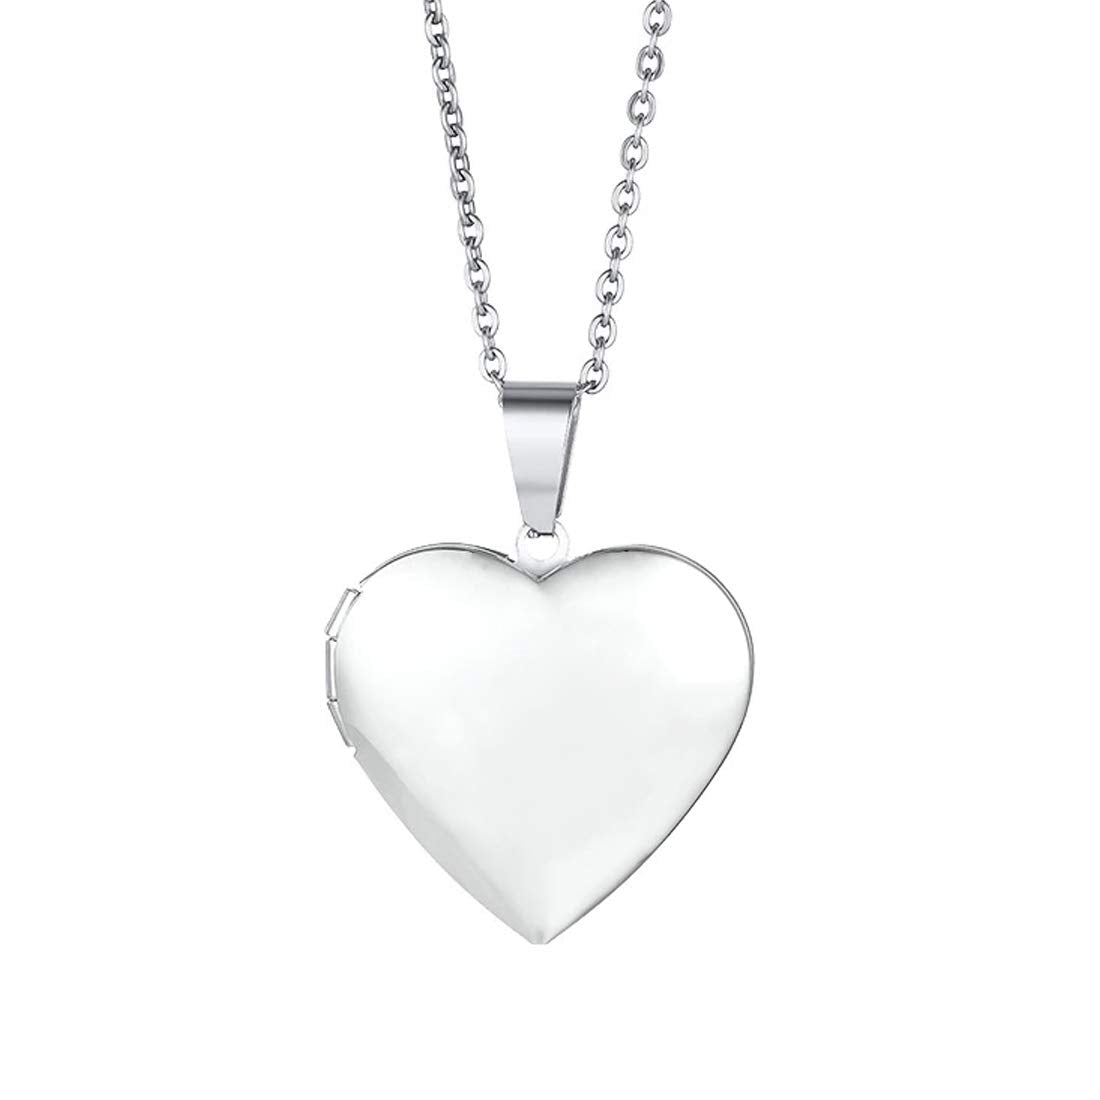 Yellow Chimes Pendant for Women Silver Plated Openable Heart Photo Frame Locket Gift Jewelry Pendant Necklace for Men and Women.